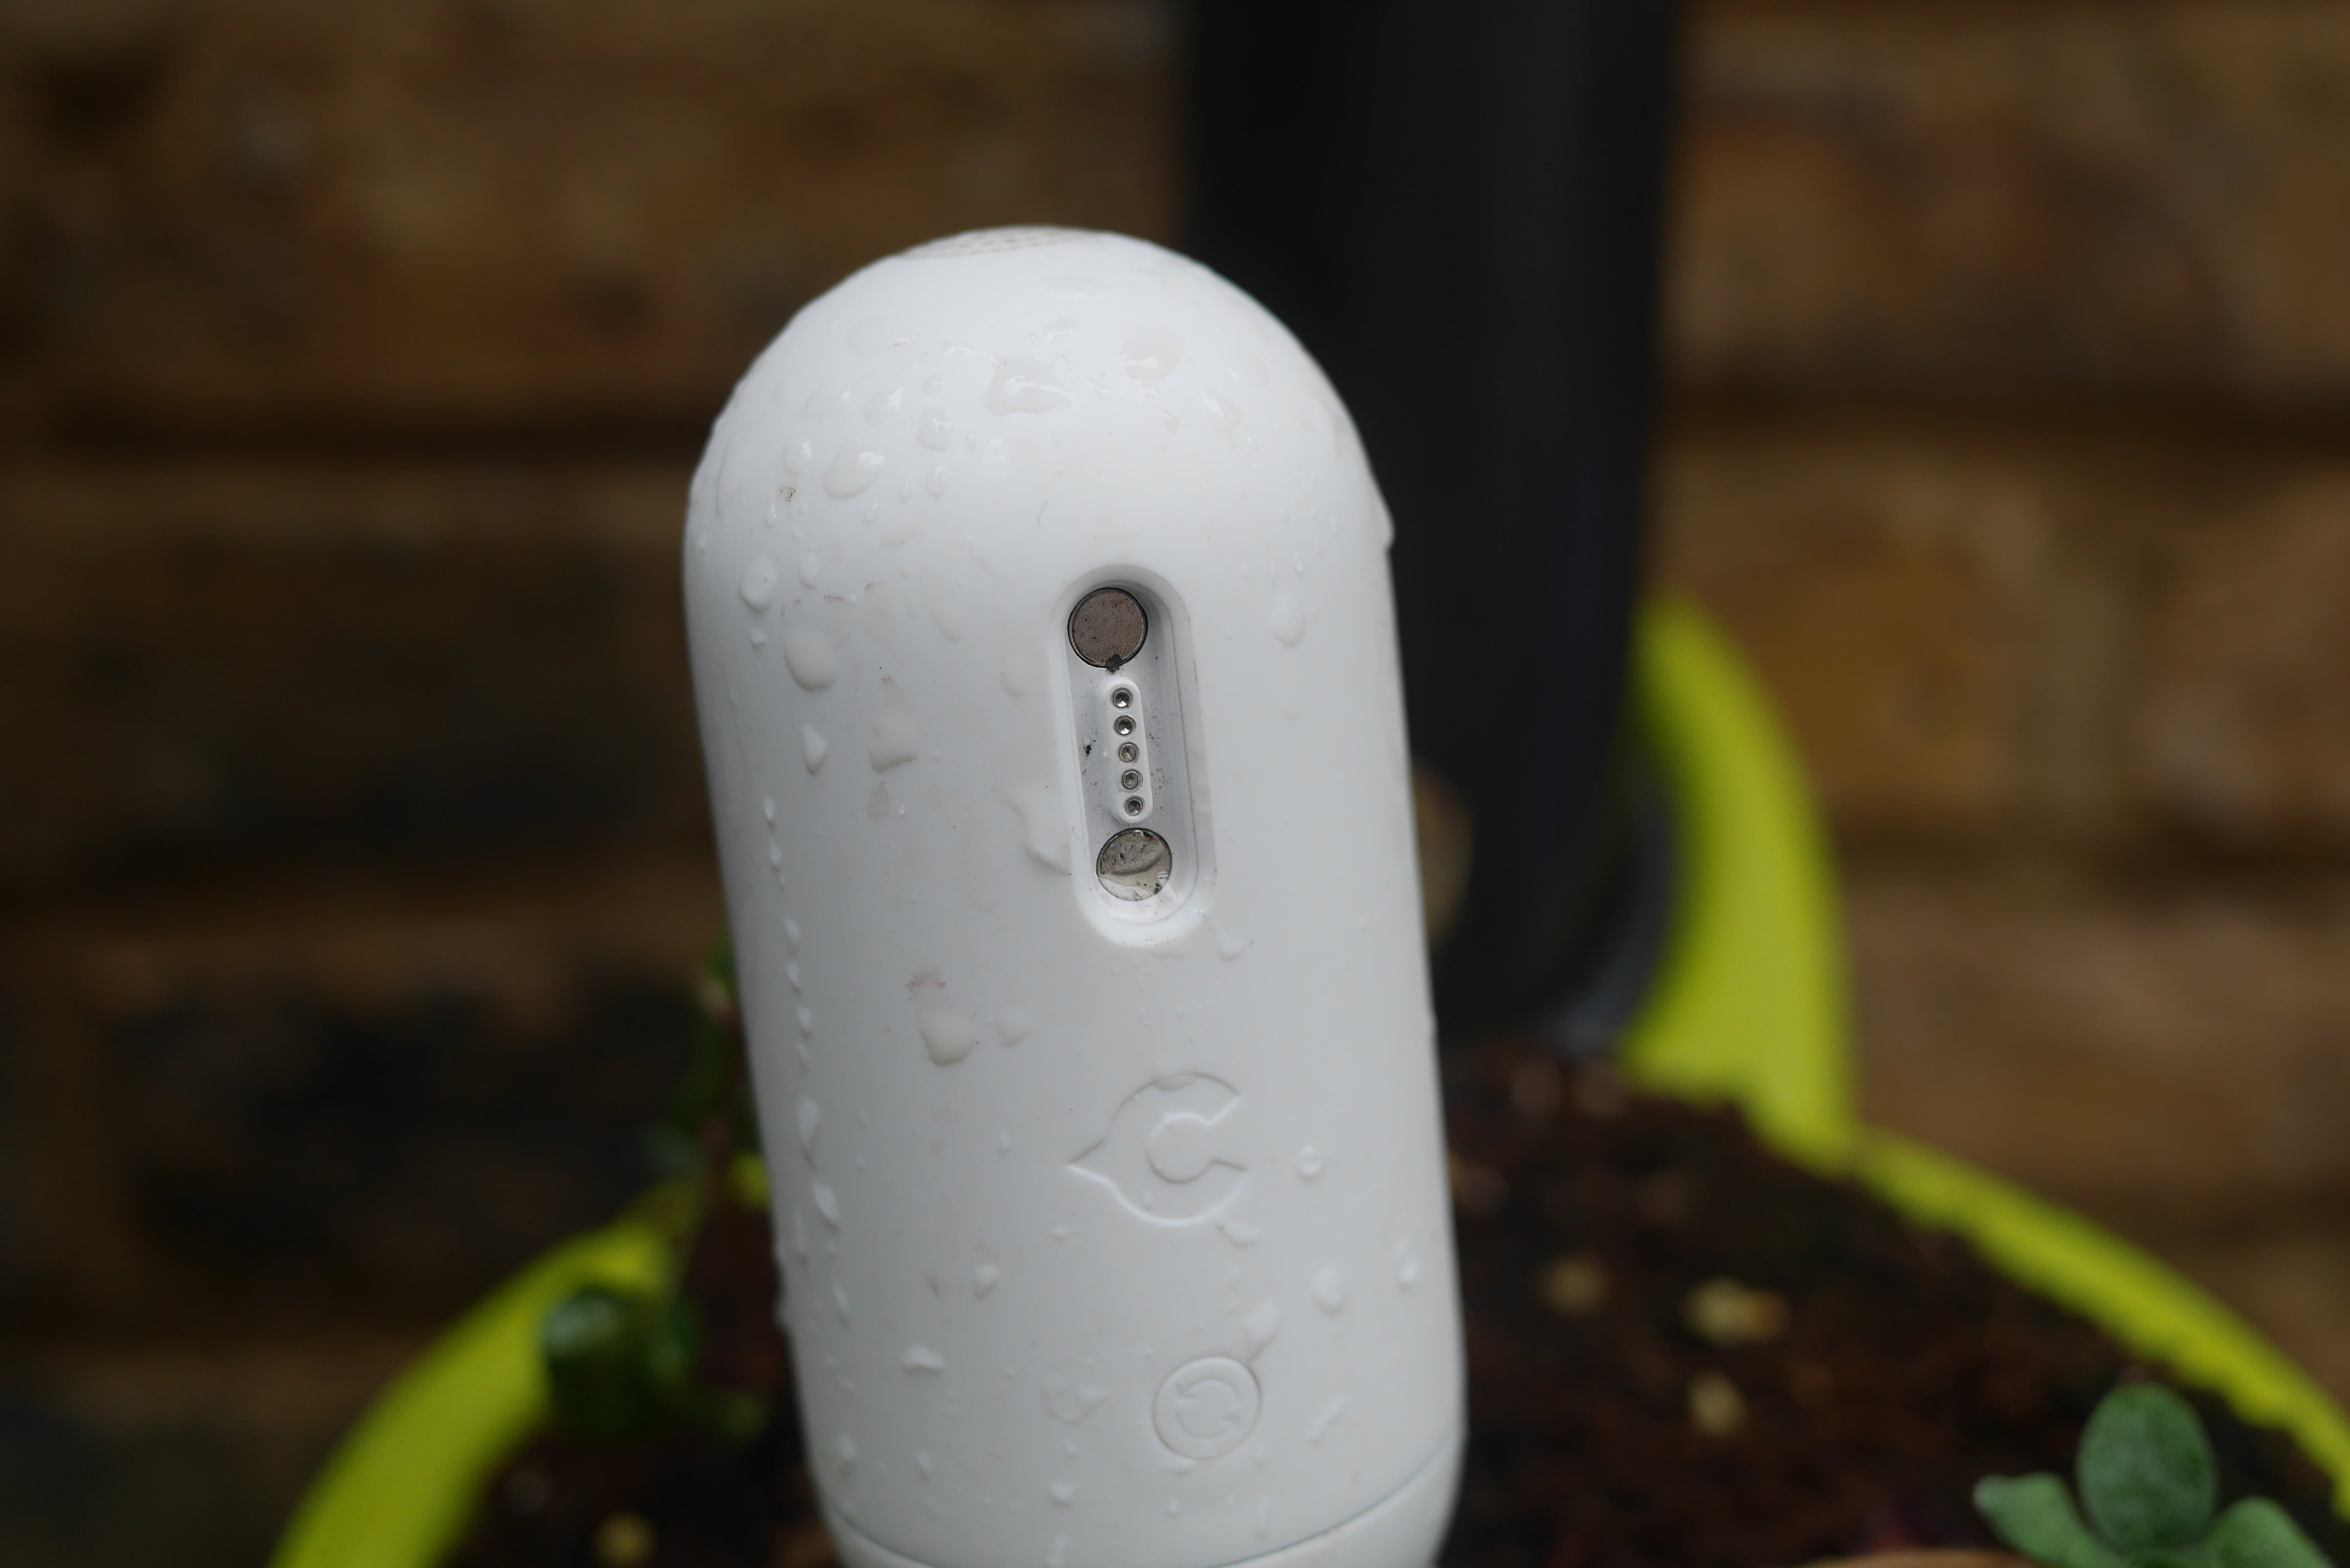 Canary Flex security camera with water droplets on it.